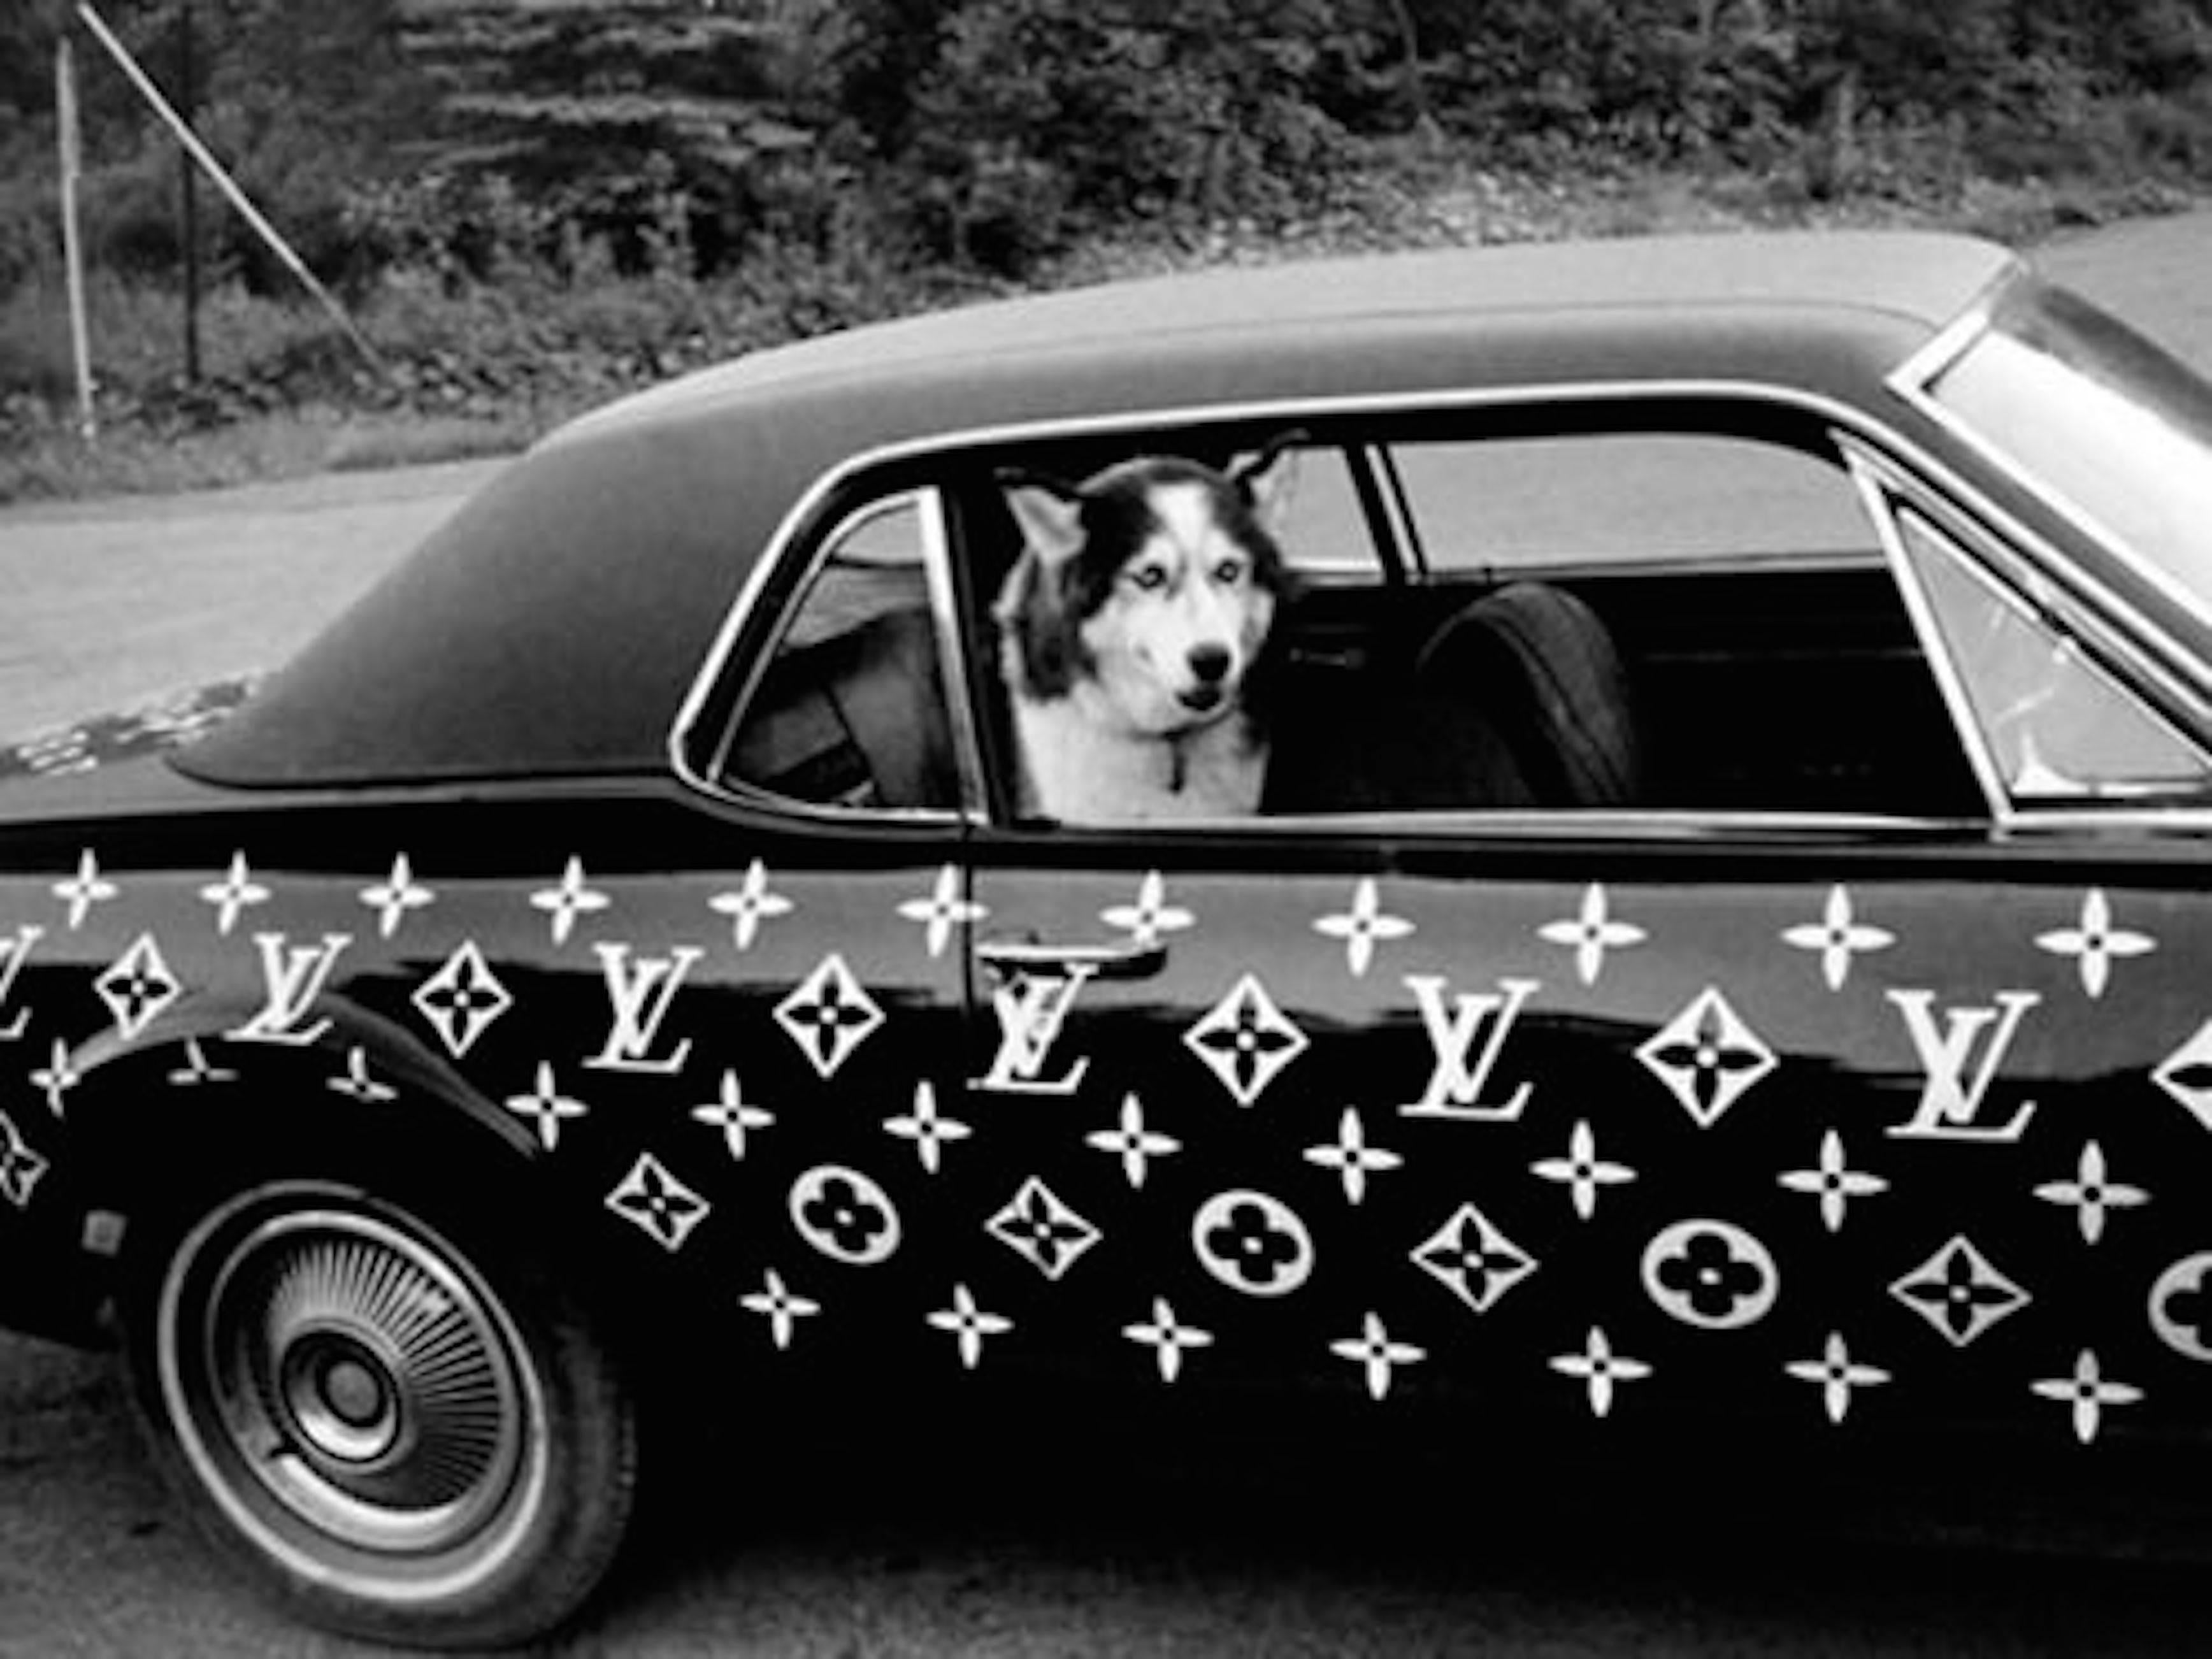 Ricky Powell Black and White Photograph - Louis Vuitton Car